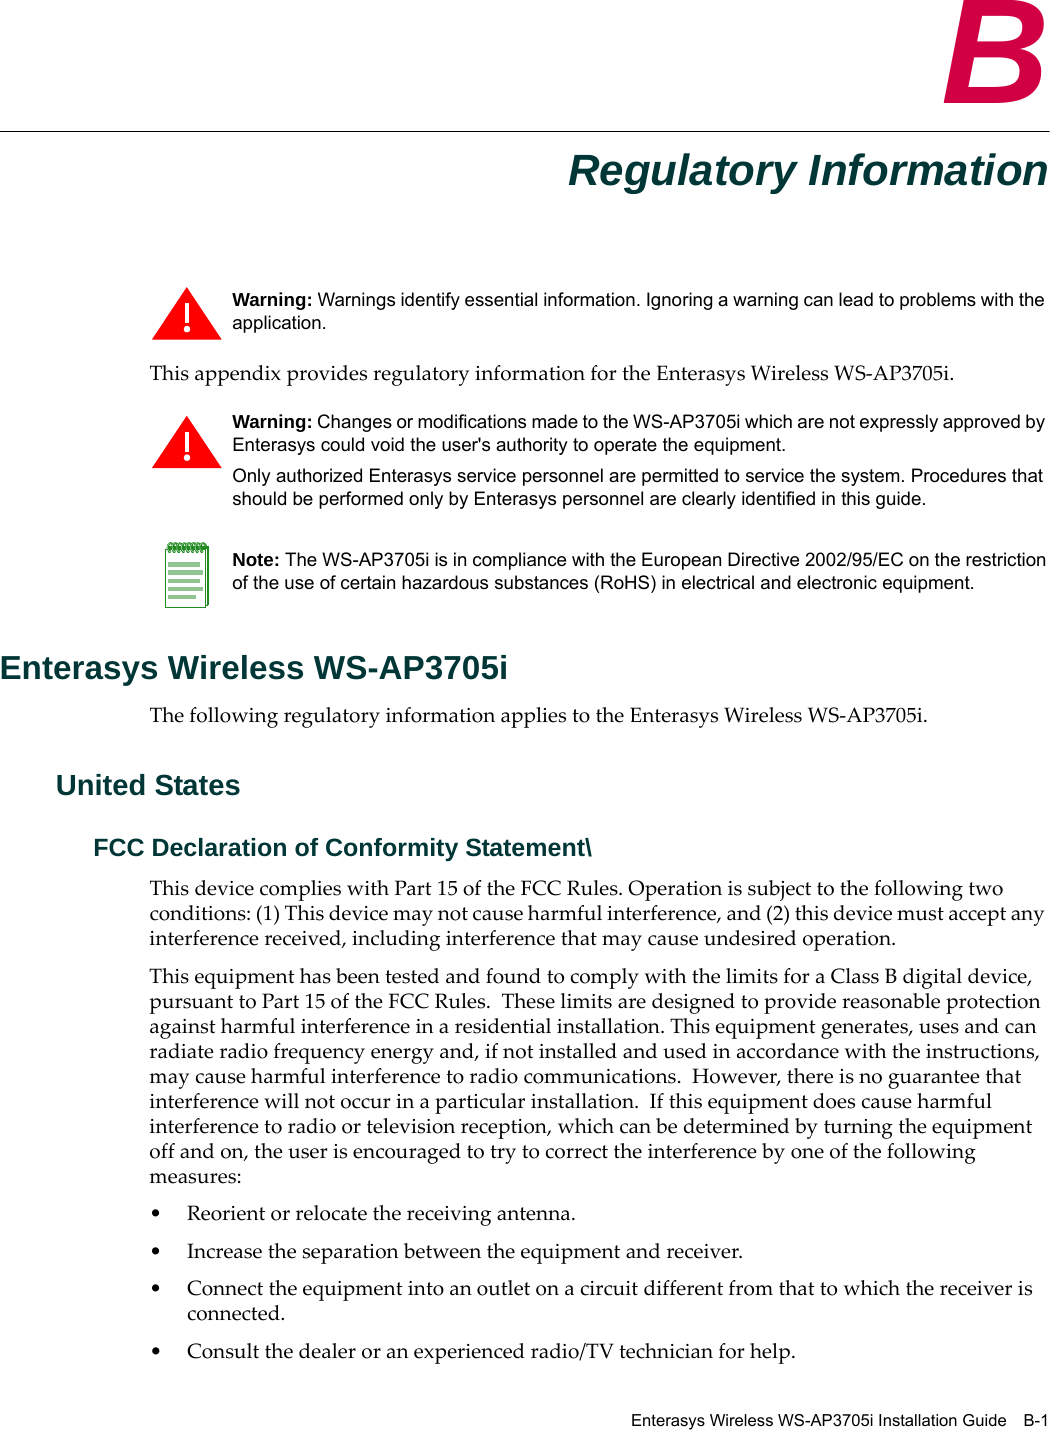 Enterasys Wireless WS-AP3705i Installation Guide B-1BRegulatory InformationThis appendix provides regulatory information for the Enterasys Wireless WS-AP3705i.Enterasys Wireless WS-AP3705iThe following regulatory information applies to the Enterasys Wireless WS-AP3705i.United StatesFCC Declaration of Conformity Statement\This device complies with Part 15 of the FCC Rules. Operation is subject to the following two conditions: (1) This device may not cause harmful interference, and (2) this device must accept any interference received, including interference that may cause undesired operation.This equipment has been tested and found to comply with the limits for a Class B digital device, pursuant to Part 15 of the FCC Rules.  These limits are designed to provide reasonable protection against harmful interference in a residential installation. This equipment generates, uses and can radiate radio frequency energy and, if not installed and used in accordance with the instructions, may cause harmful interference to radio communications.  However, there is no guarantee that interference will not occur in a particular installation.  If this equipment does cause harmful interference to radio or television reception, which can be determined by turning the equipment off and on, the user is encouraged to try to correct the interference by one of the following measures:• Reorient or relocate the receiving antenna.• Increase the separation between the equipment and receiver.• Connect the equipment into an outlet on a circuit different from that to which the receiver is connected.• Consult the dealer or an experienced radio/TV technician for help.Warning: Warnings identify essential information. Ignoring a warning can lead to problems with the application.Warning: Changes or modifications made to the WS-AP3705i which are not expressly approved by Enterasys could void the user&apos;s authority to operate the equipment.Only authorized Enterasys service personnel are permitted to service the system. Procedures that should be performed only by Enterasys personnel are clearly identified in this guide.Note: The WS-AP3705i is in compliance with the European Directive 2002/95/EC on the restriction of the use of certain hazardous substances (RoHS) in electrical and electronic equipment.